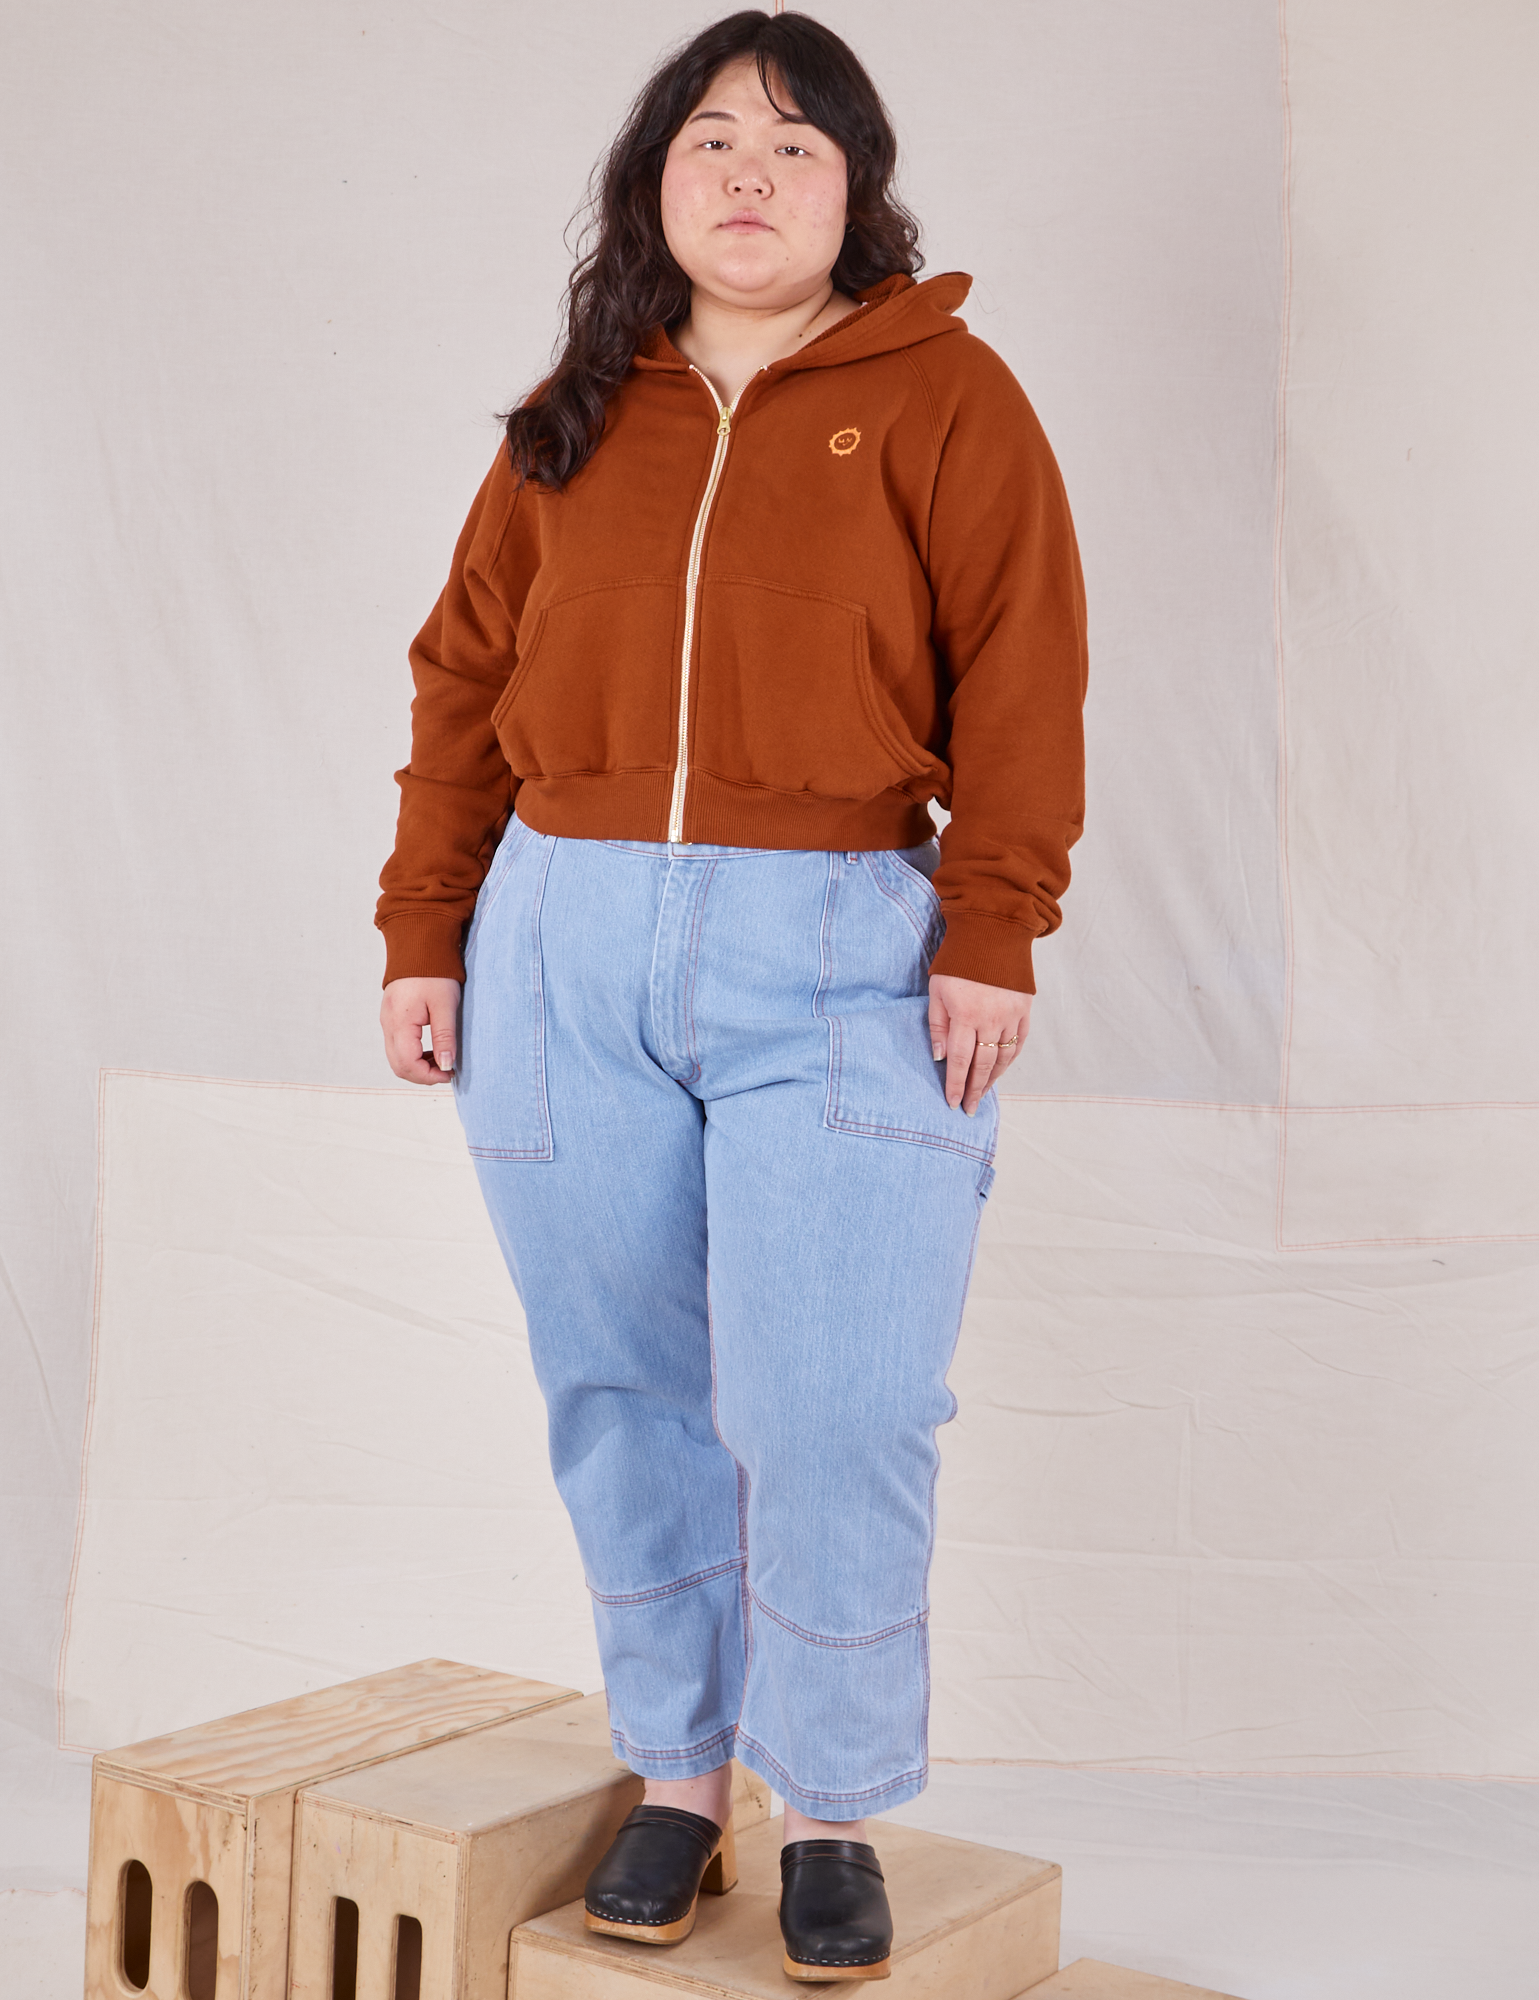 Ashley is wearing Cropped Zip Hoodie in Burnt Terracotta and light wash Carpenter Jeans